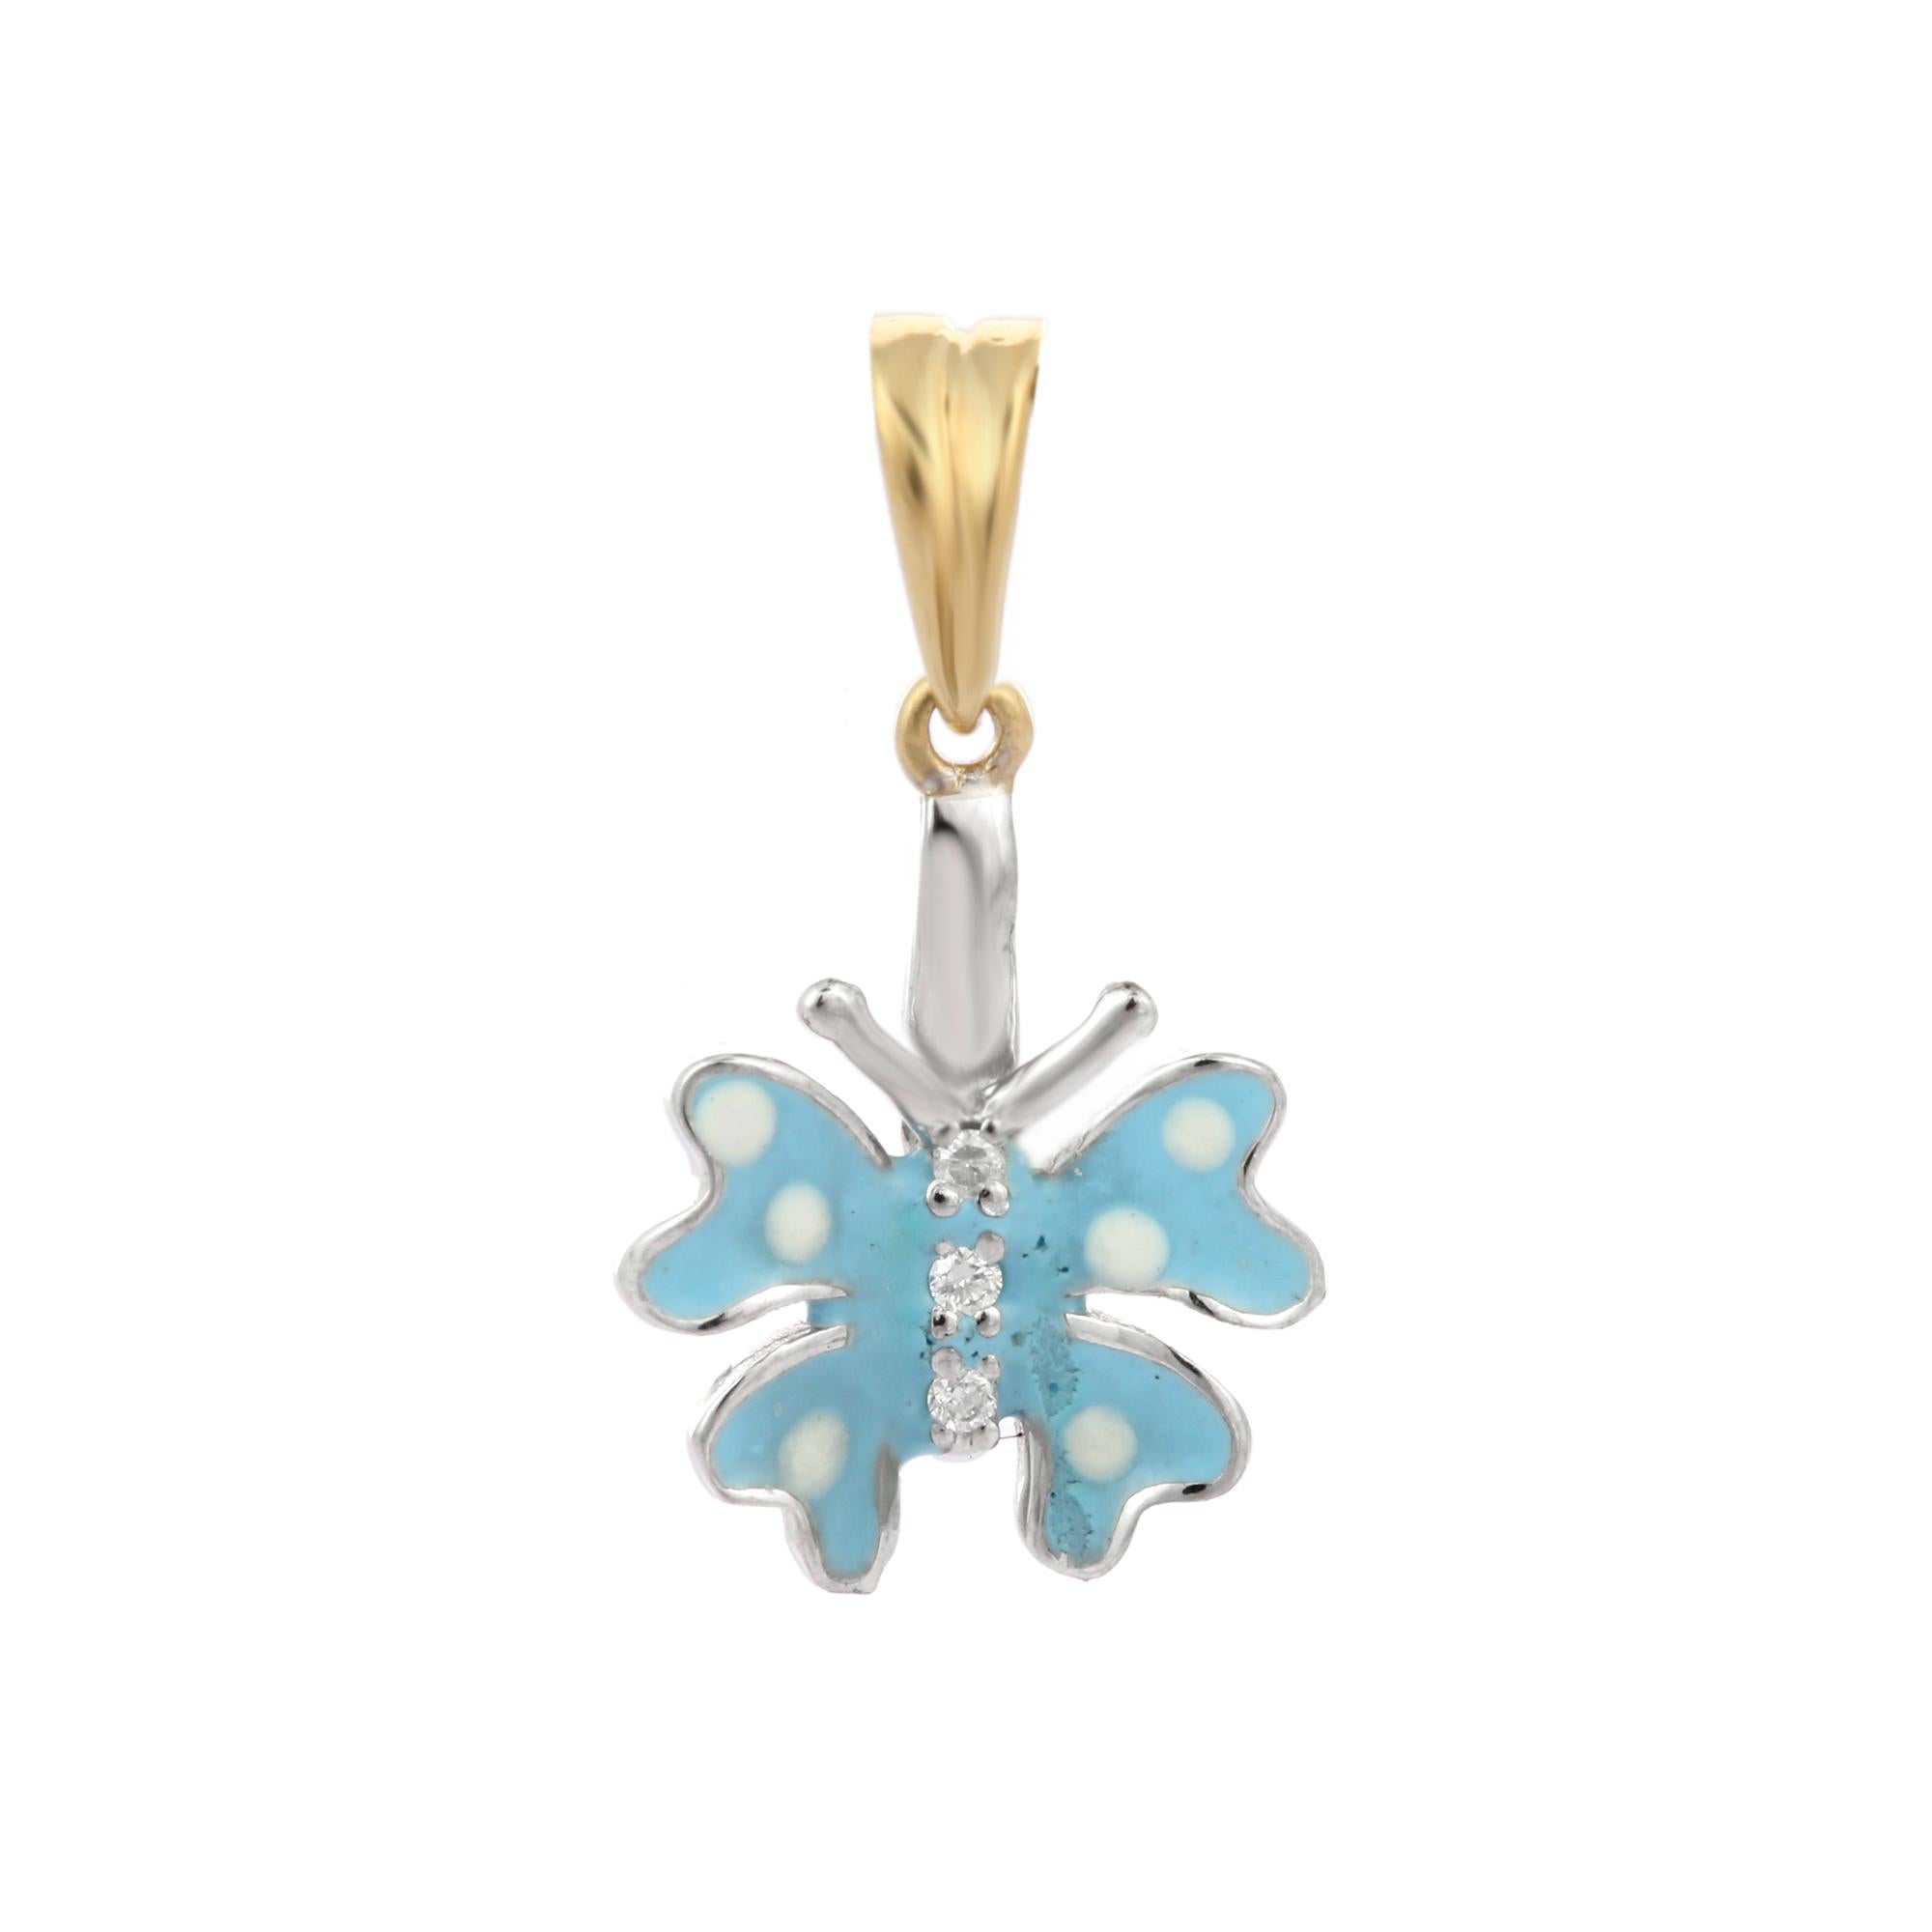 Diamond and enamel butterfly pendant in 18K Gold. It has round cut diamonds that completes your look with a decent touch. This butterfly pendant has become a symbol for rebirth and resurrection. Pendants are used to wear or gifted to represent love